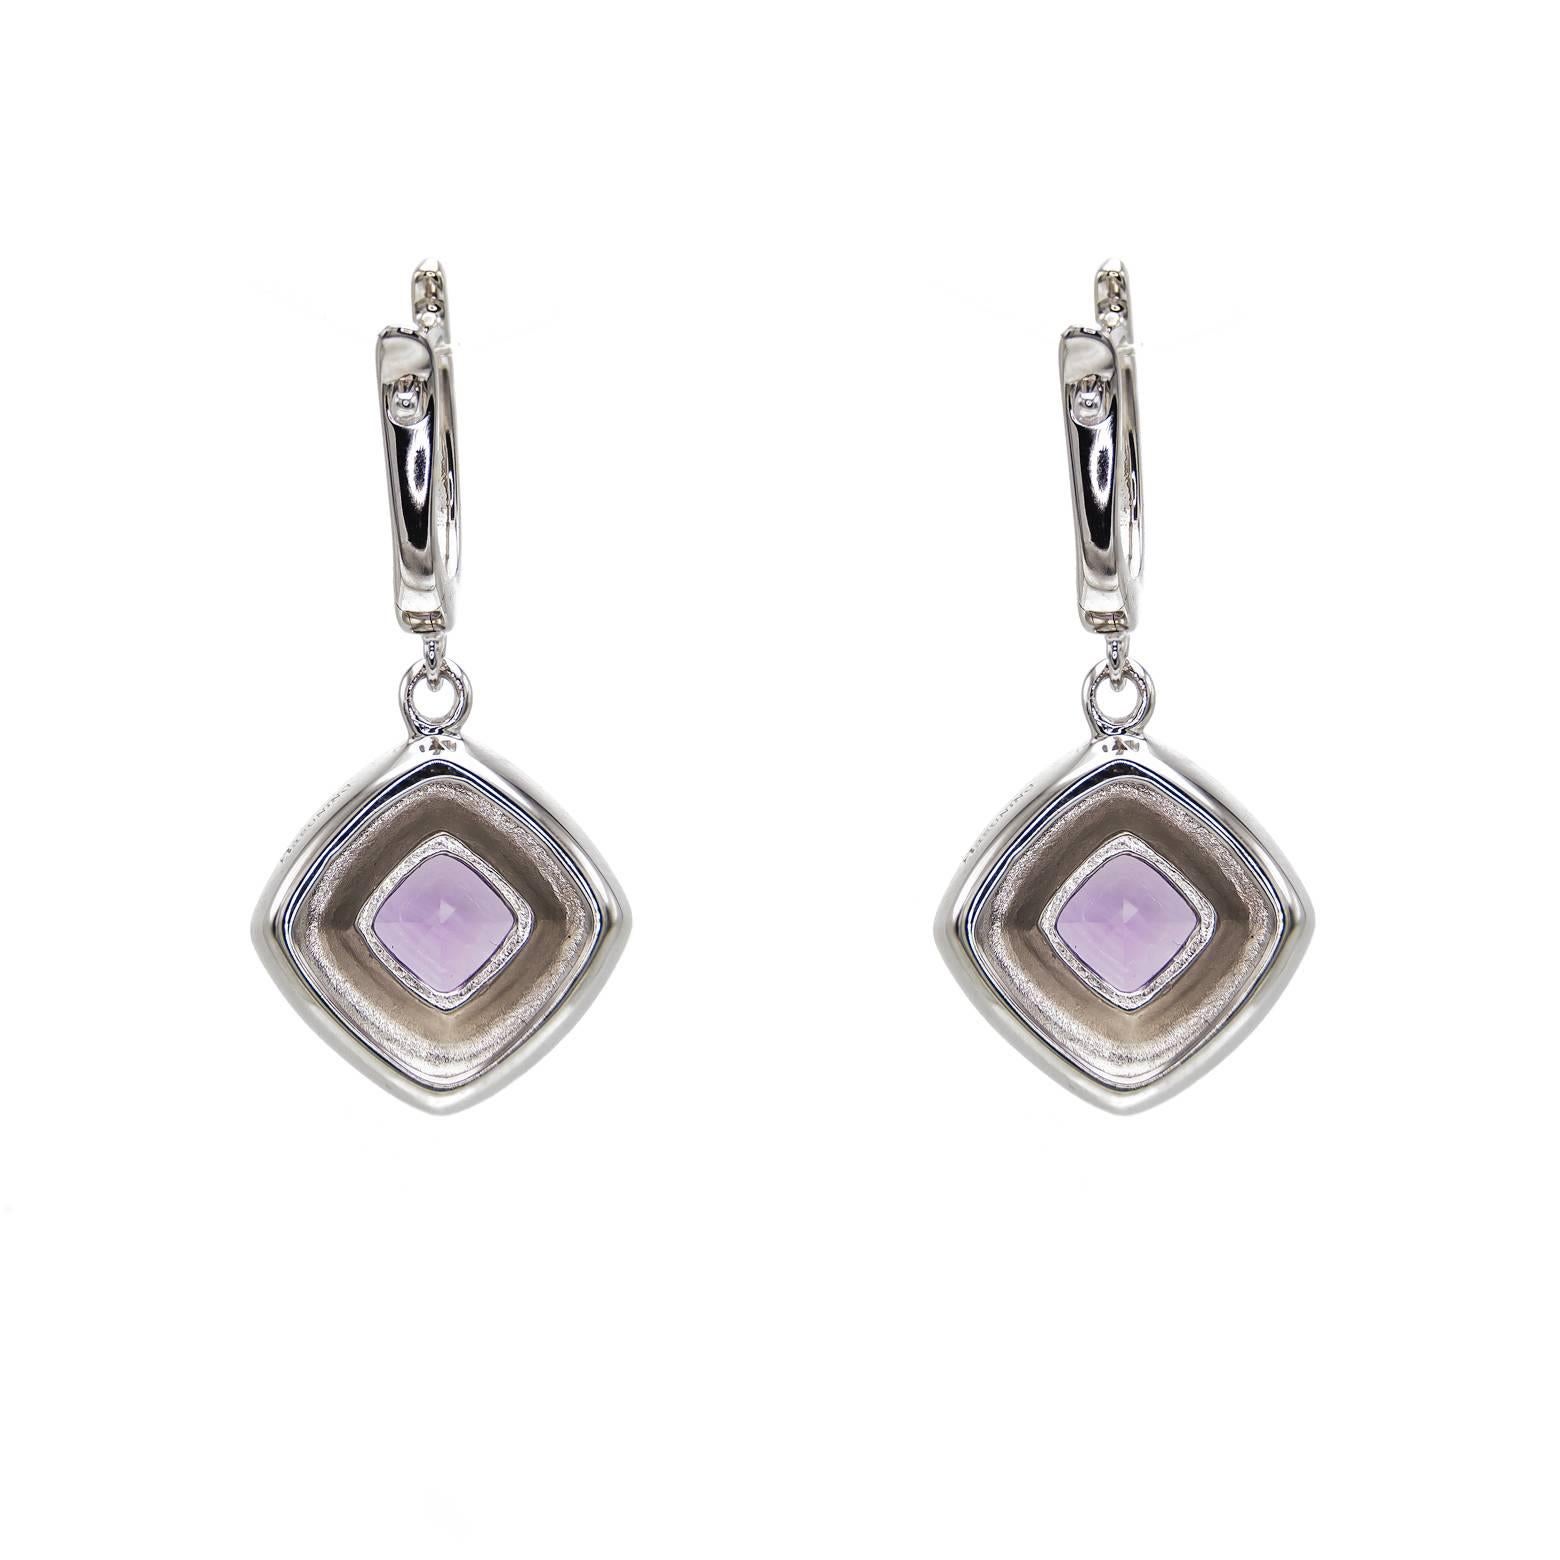 These brilliant bright square amethyst earrings dangle and swing with a lovely lever-back. The weight is substantial and the look is clean and elegant. A satin finish in the sterling silver and a beautiful color of purple amethyst. 